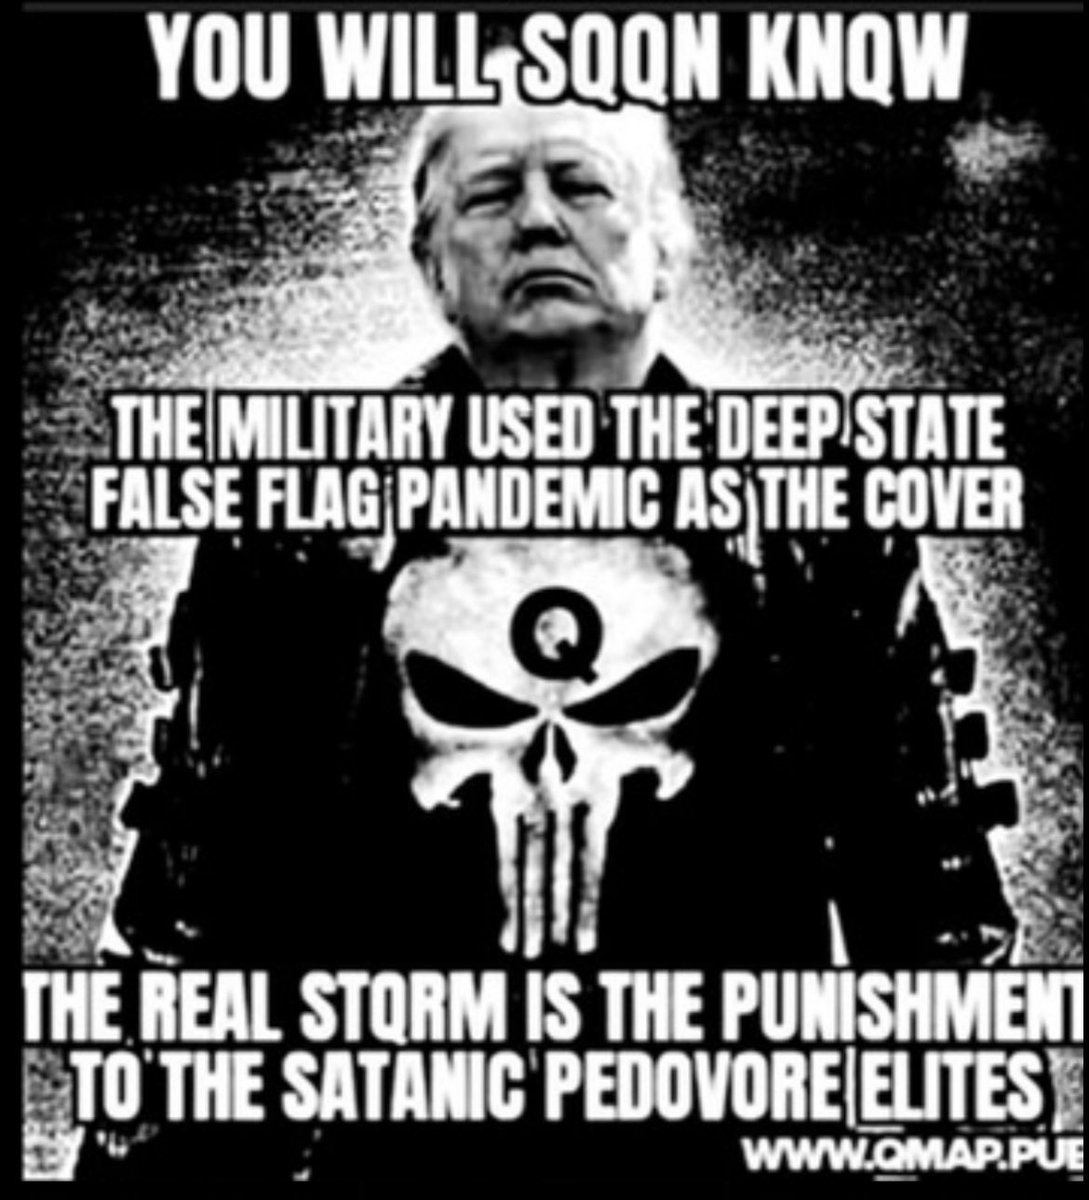 You will SQQN KnQW 
The Military used the Deep State False Flag Pandemic as the Cover 
The Real STORM is the Punishment to the Satanic Pedovore Elites
#TheInvisibleWar
#EradicateTheEvilFromThisEarth
#SaveTheChildrenWorldWide